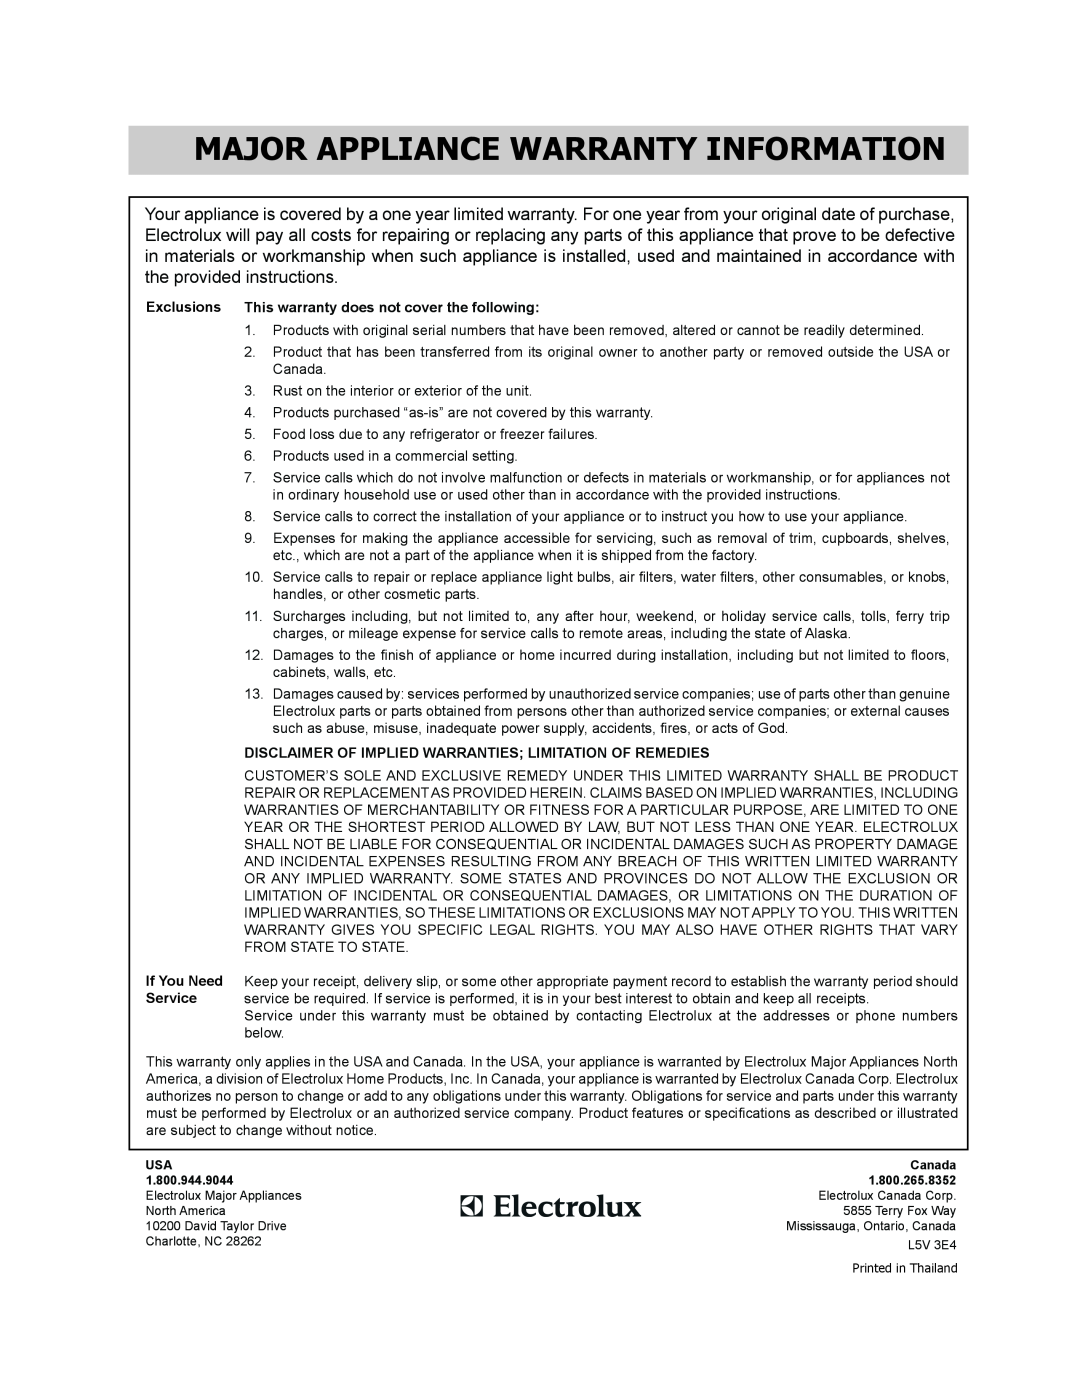 Frigidaire FGBM205KF manual Major Appliance Warranty Information, Exclusions This warranty does not cover the following 